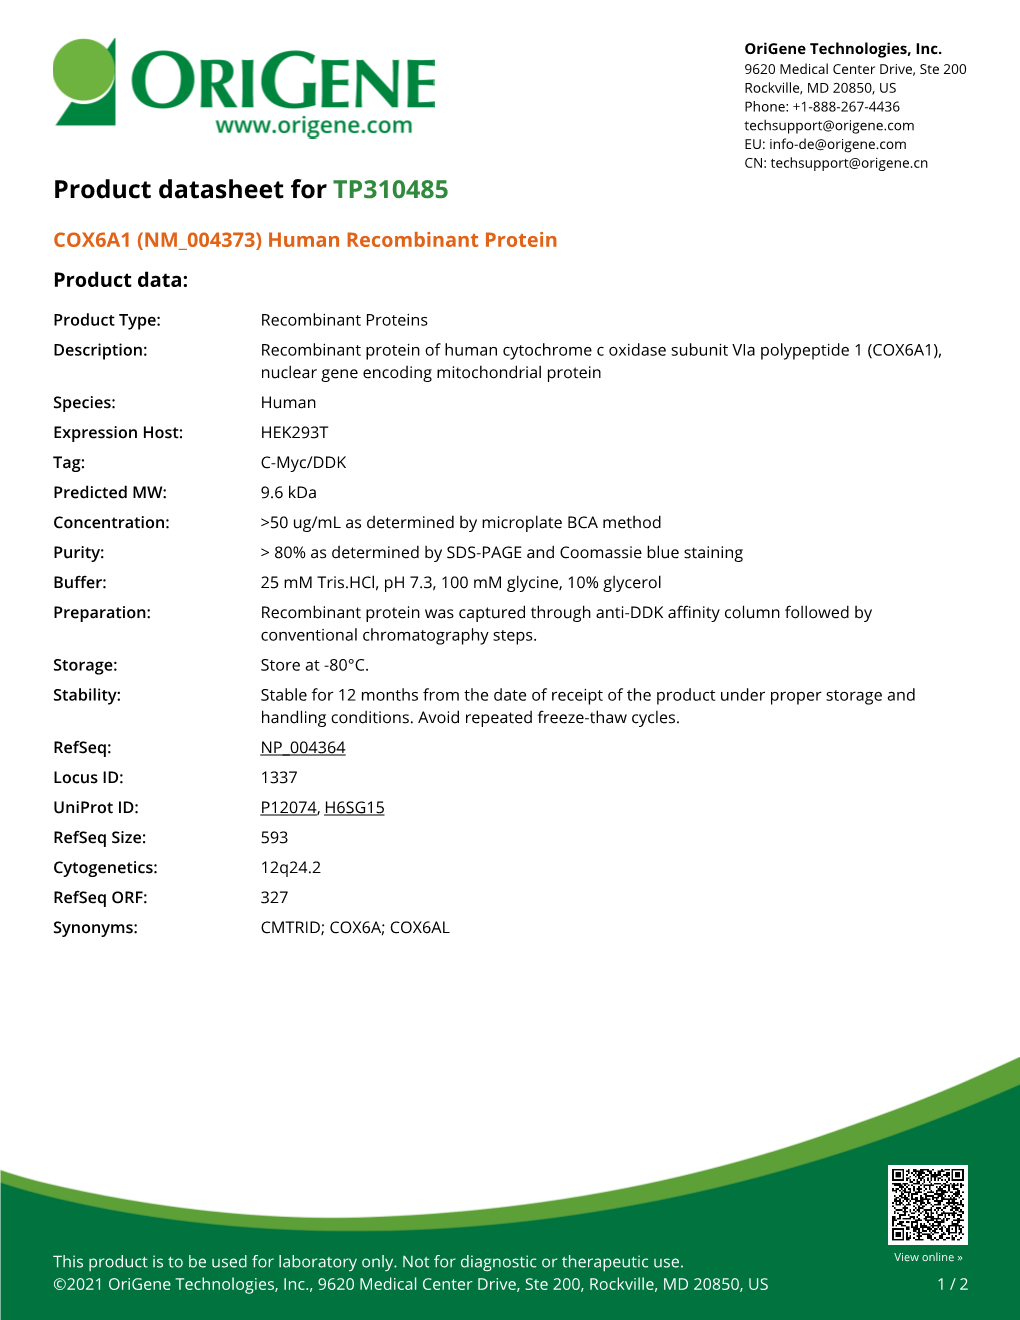 COX6A1 (NM 004373) Human Recombinant Protein Product Data